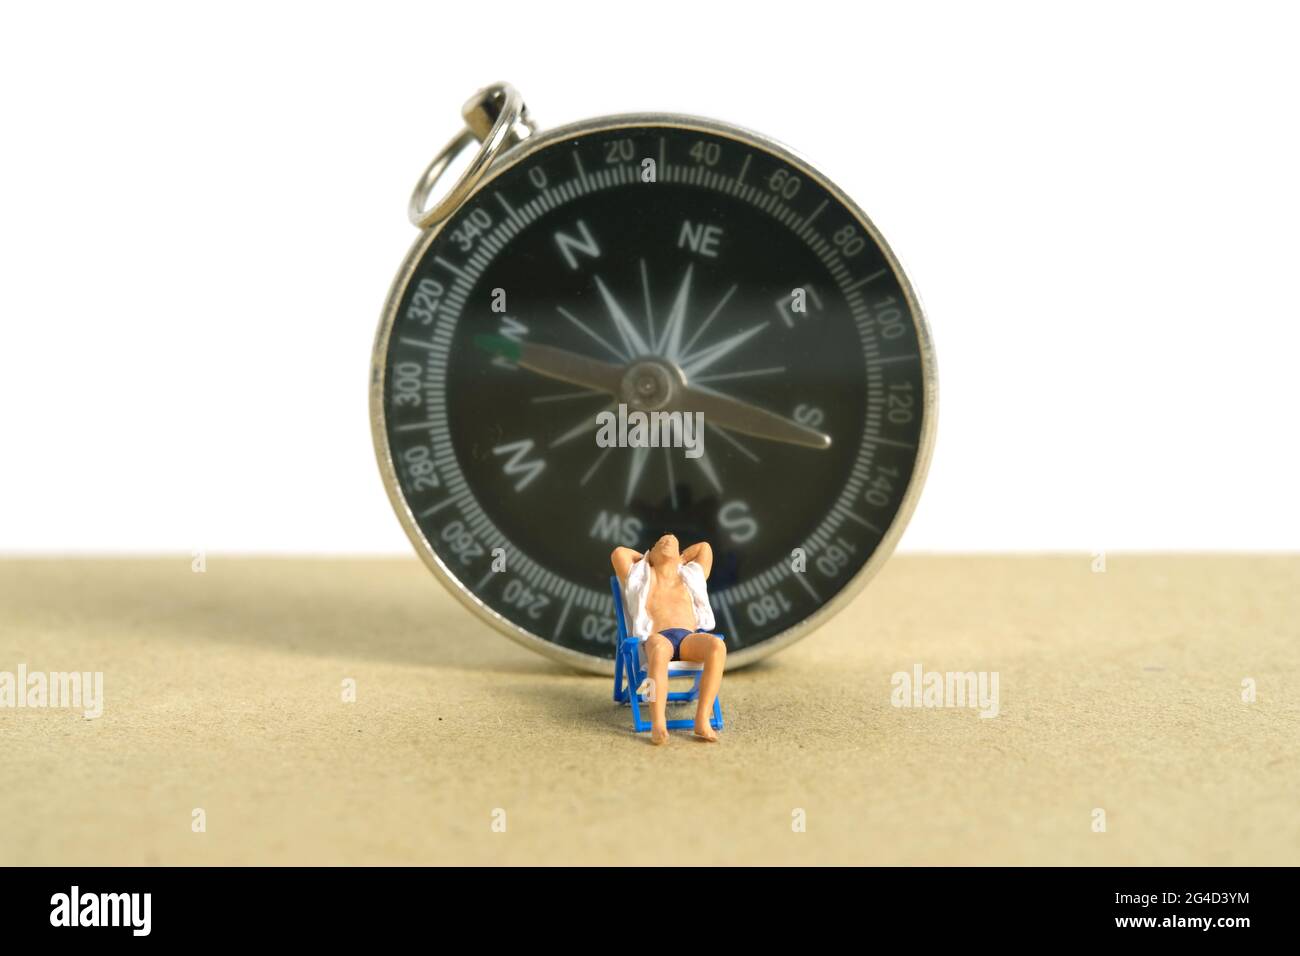 Miniature people toy figure photography. Travel destination, Men relaxing at beach chair with black compass, isolated on white background. Image photo Stock Photo